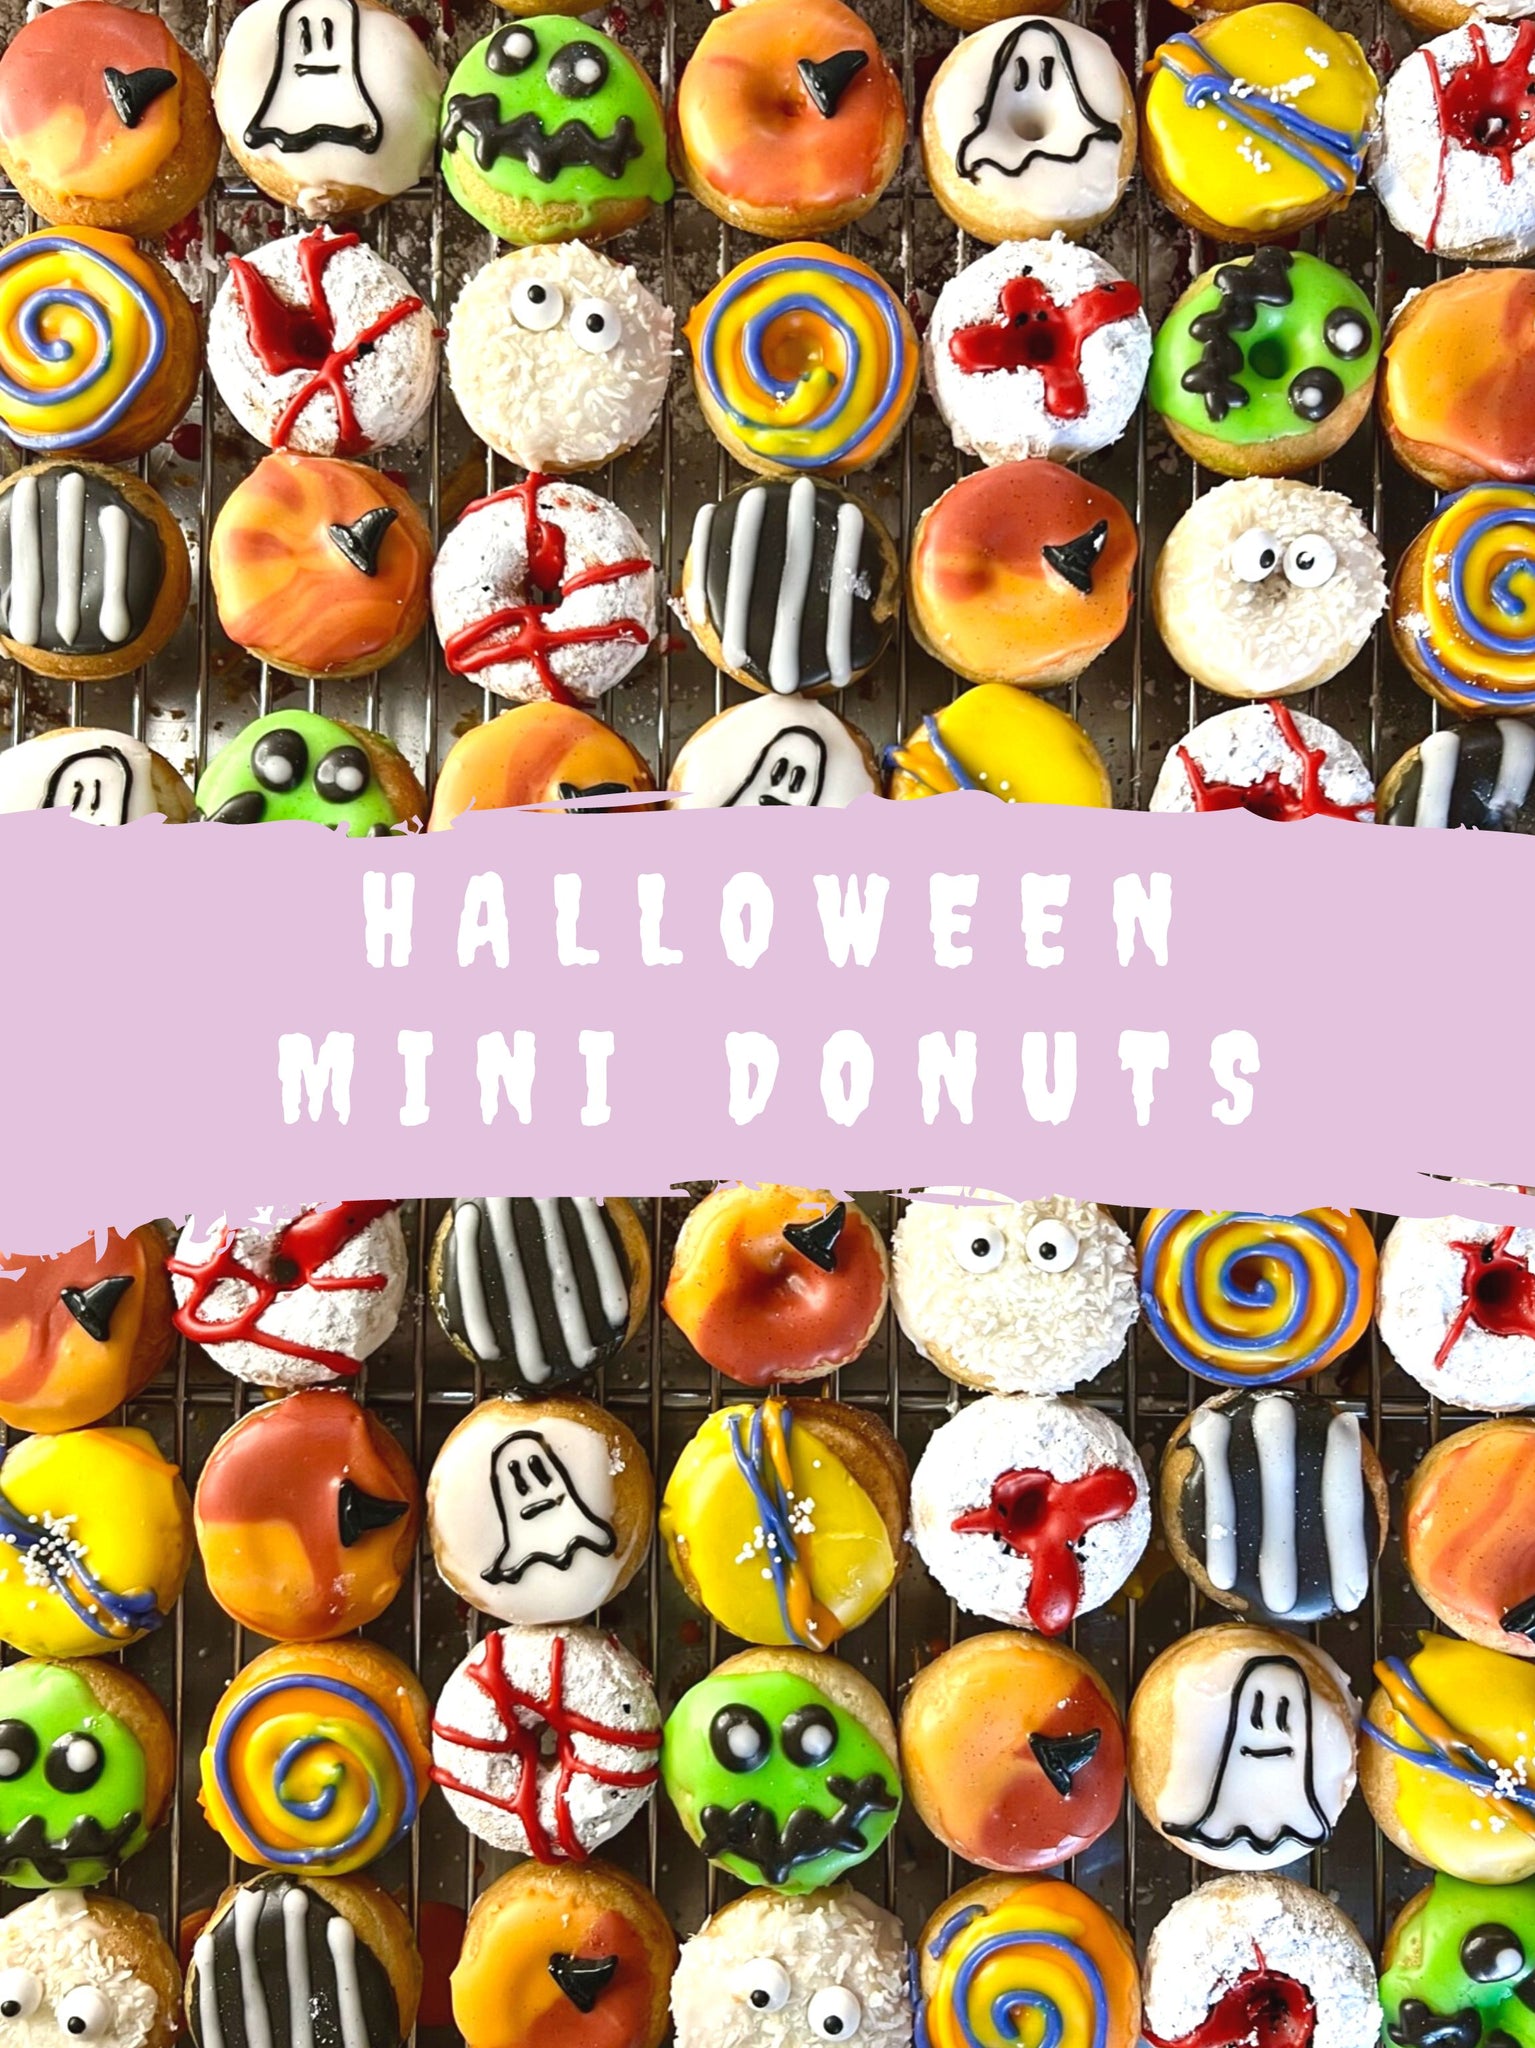 HALLOWEEN MINI DONUTS - Behind the Scenes on our SPOOKY popular Halloween Bite Box